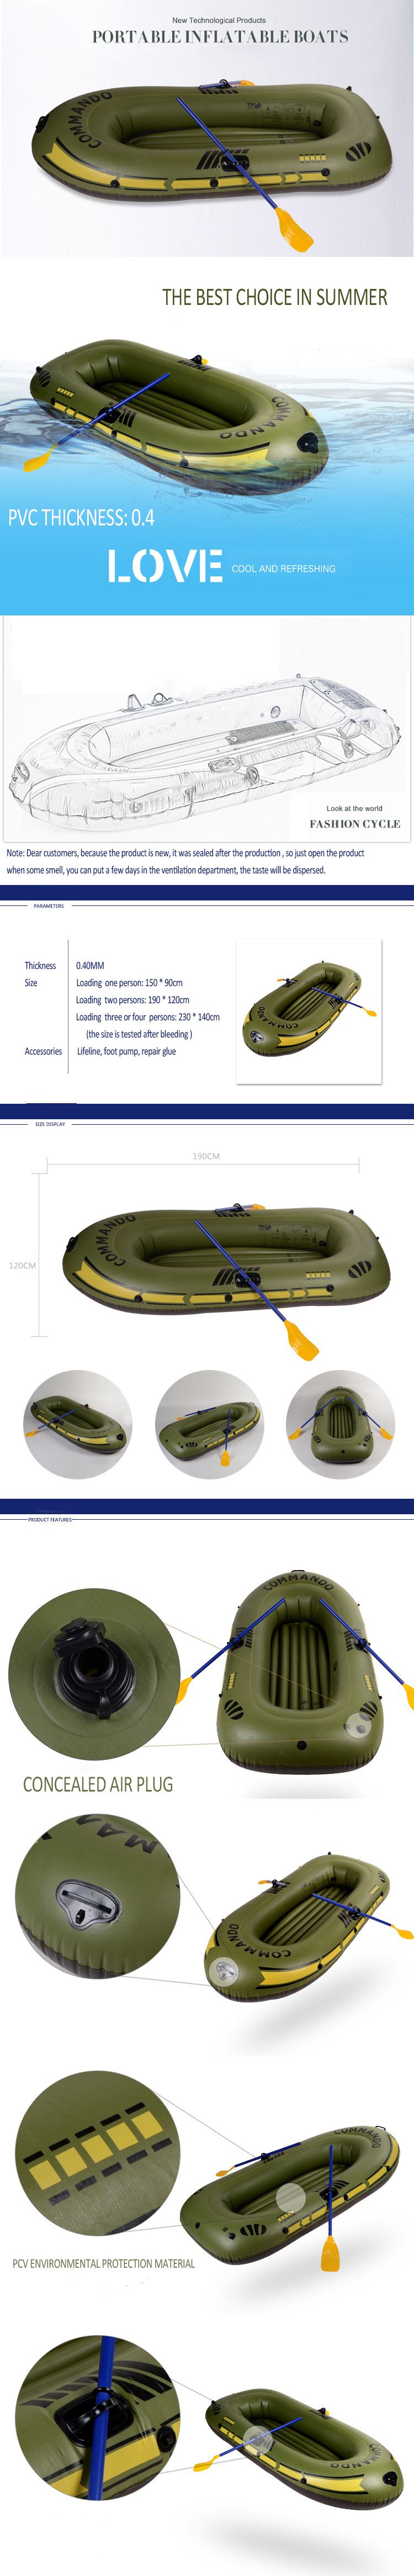 15090cm-230140cm-Portable-Inflatable-Boat-Thickening-PVC-Rowing-Boat-Fishing-Ship-for-Diver-Surfing--1095003